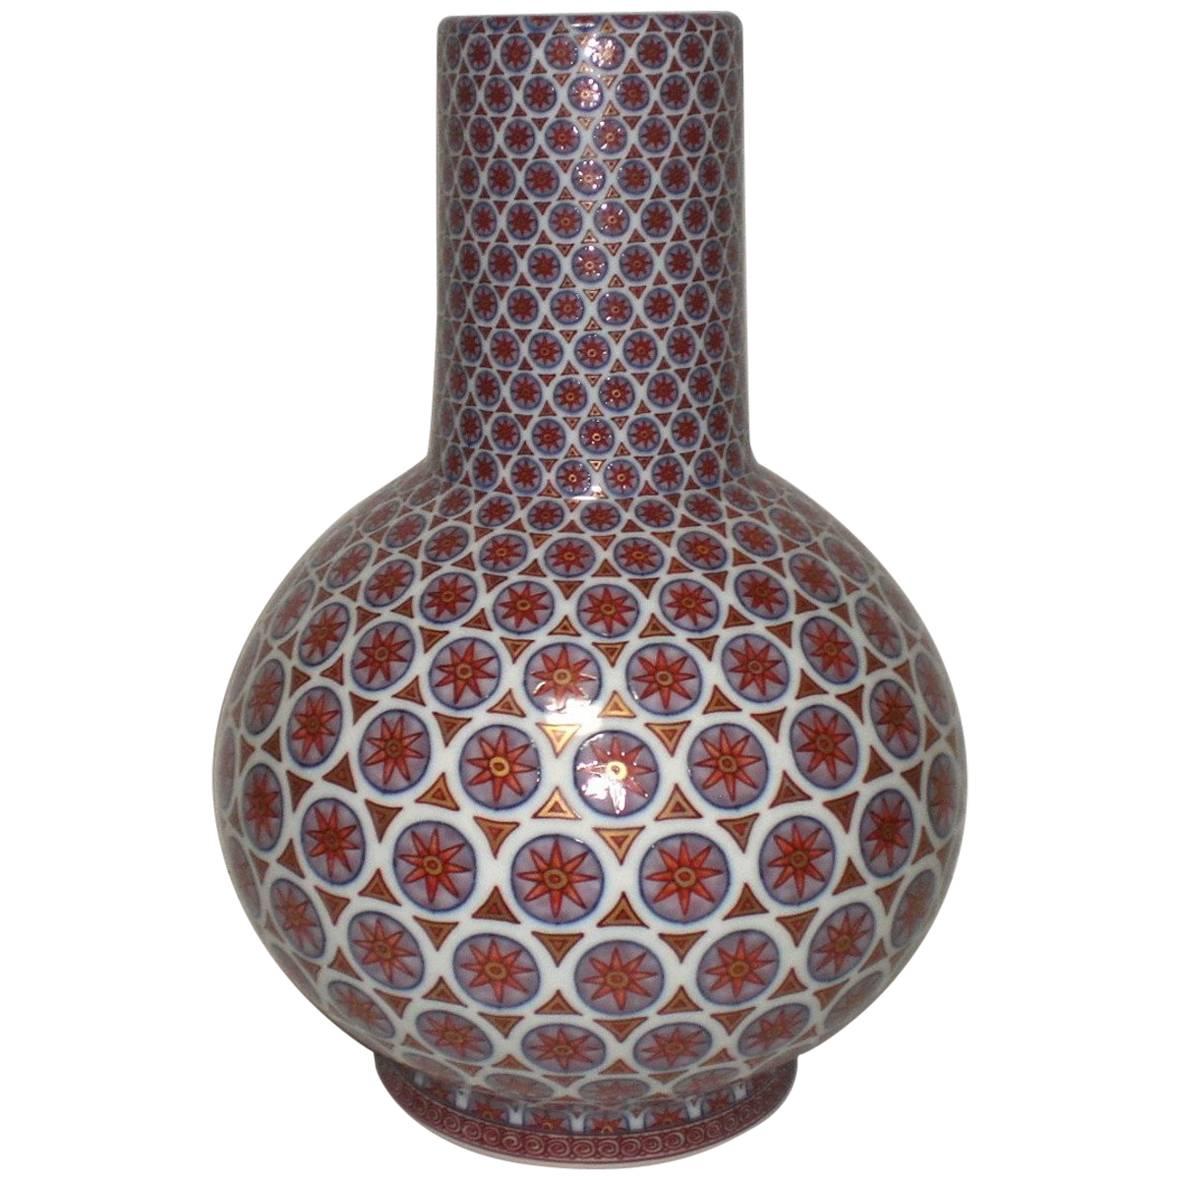 Contemporary Japanese Red Decorative Porcelain Vase by Master Artist (1931-2009)